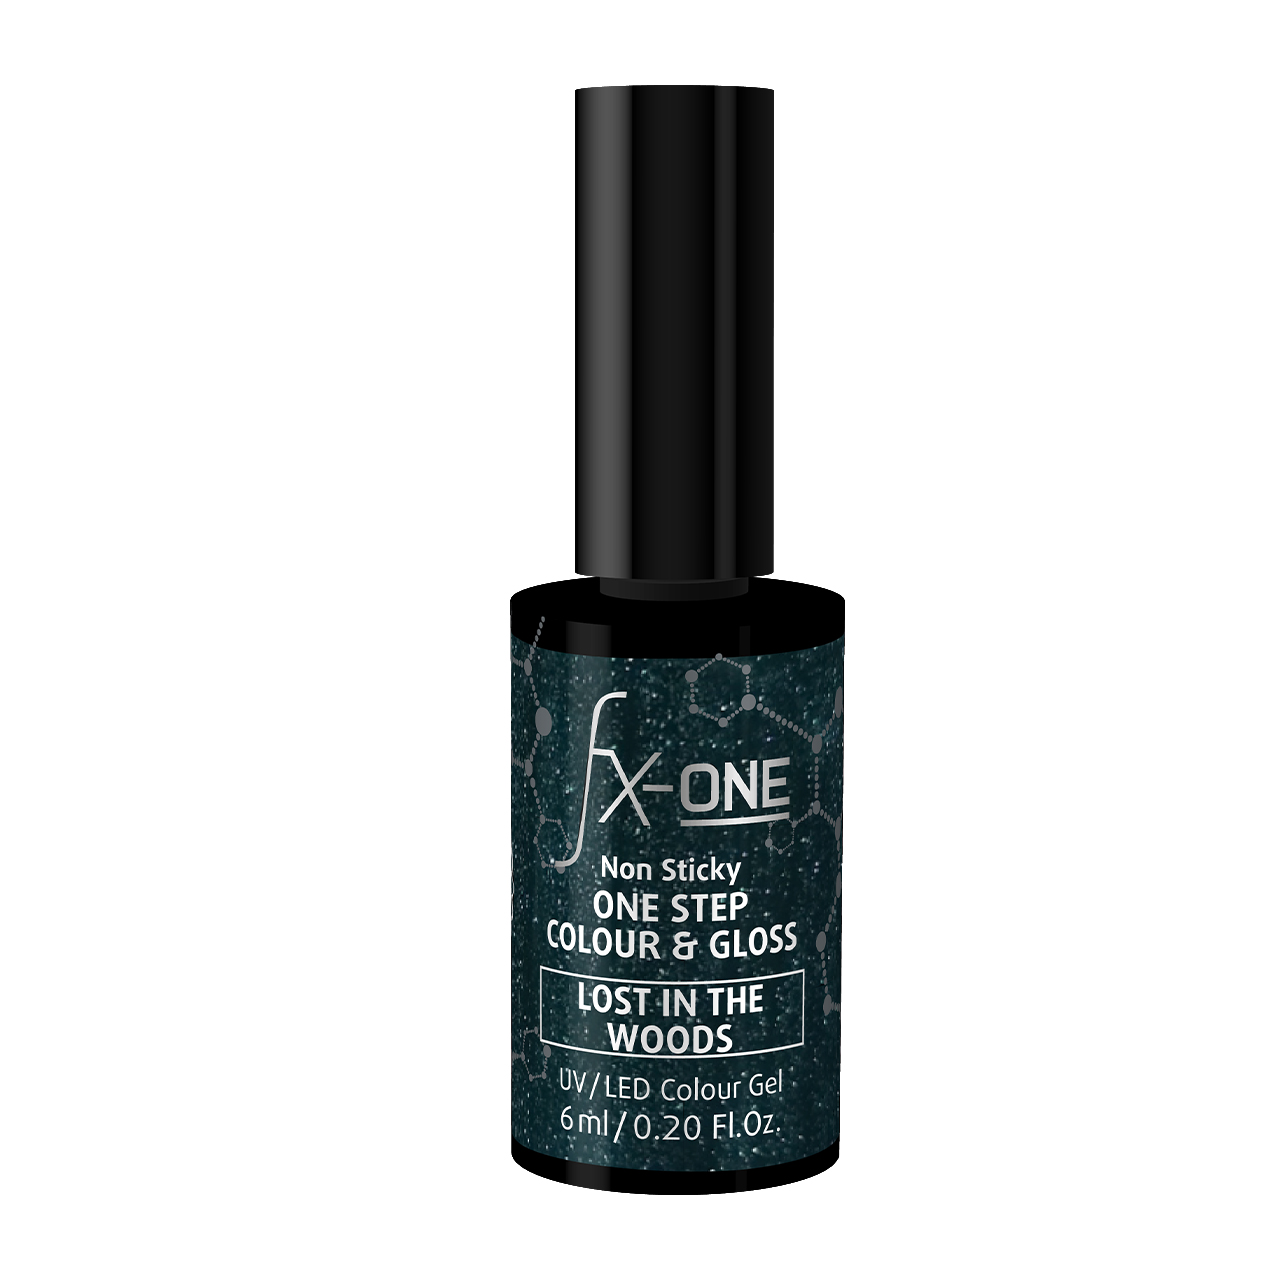 FX ONE Colour & Gloss Lost in the Woods!